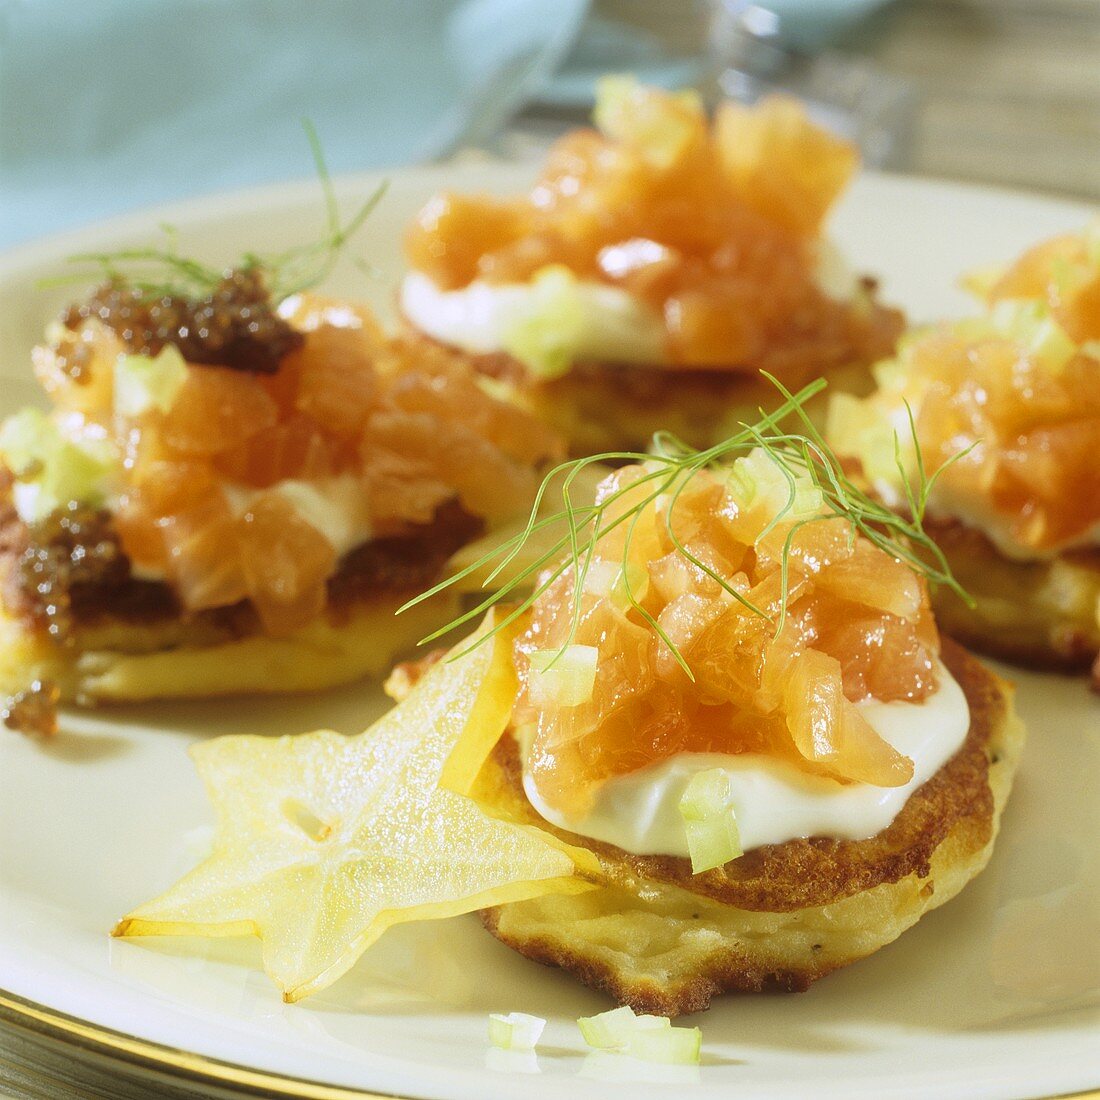 Blinis with ricotta and salmon tartare